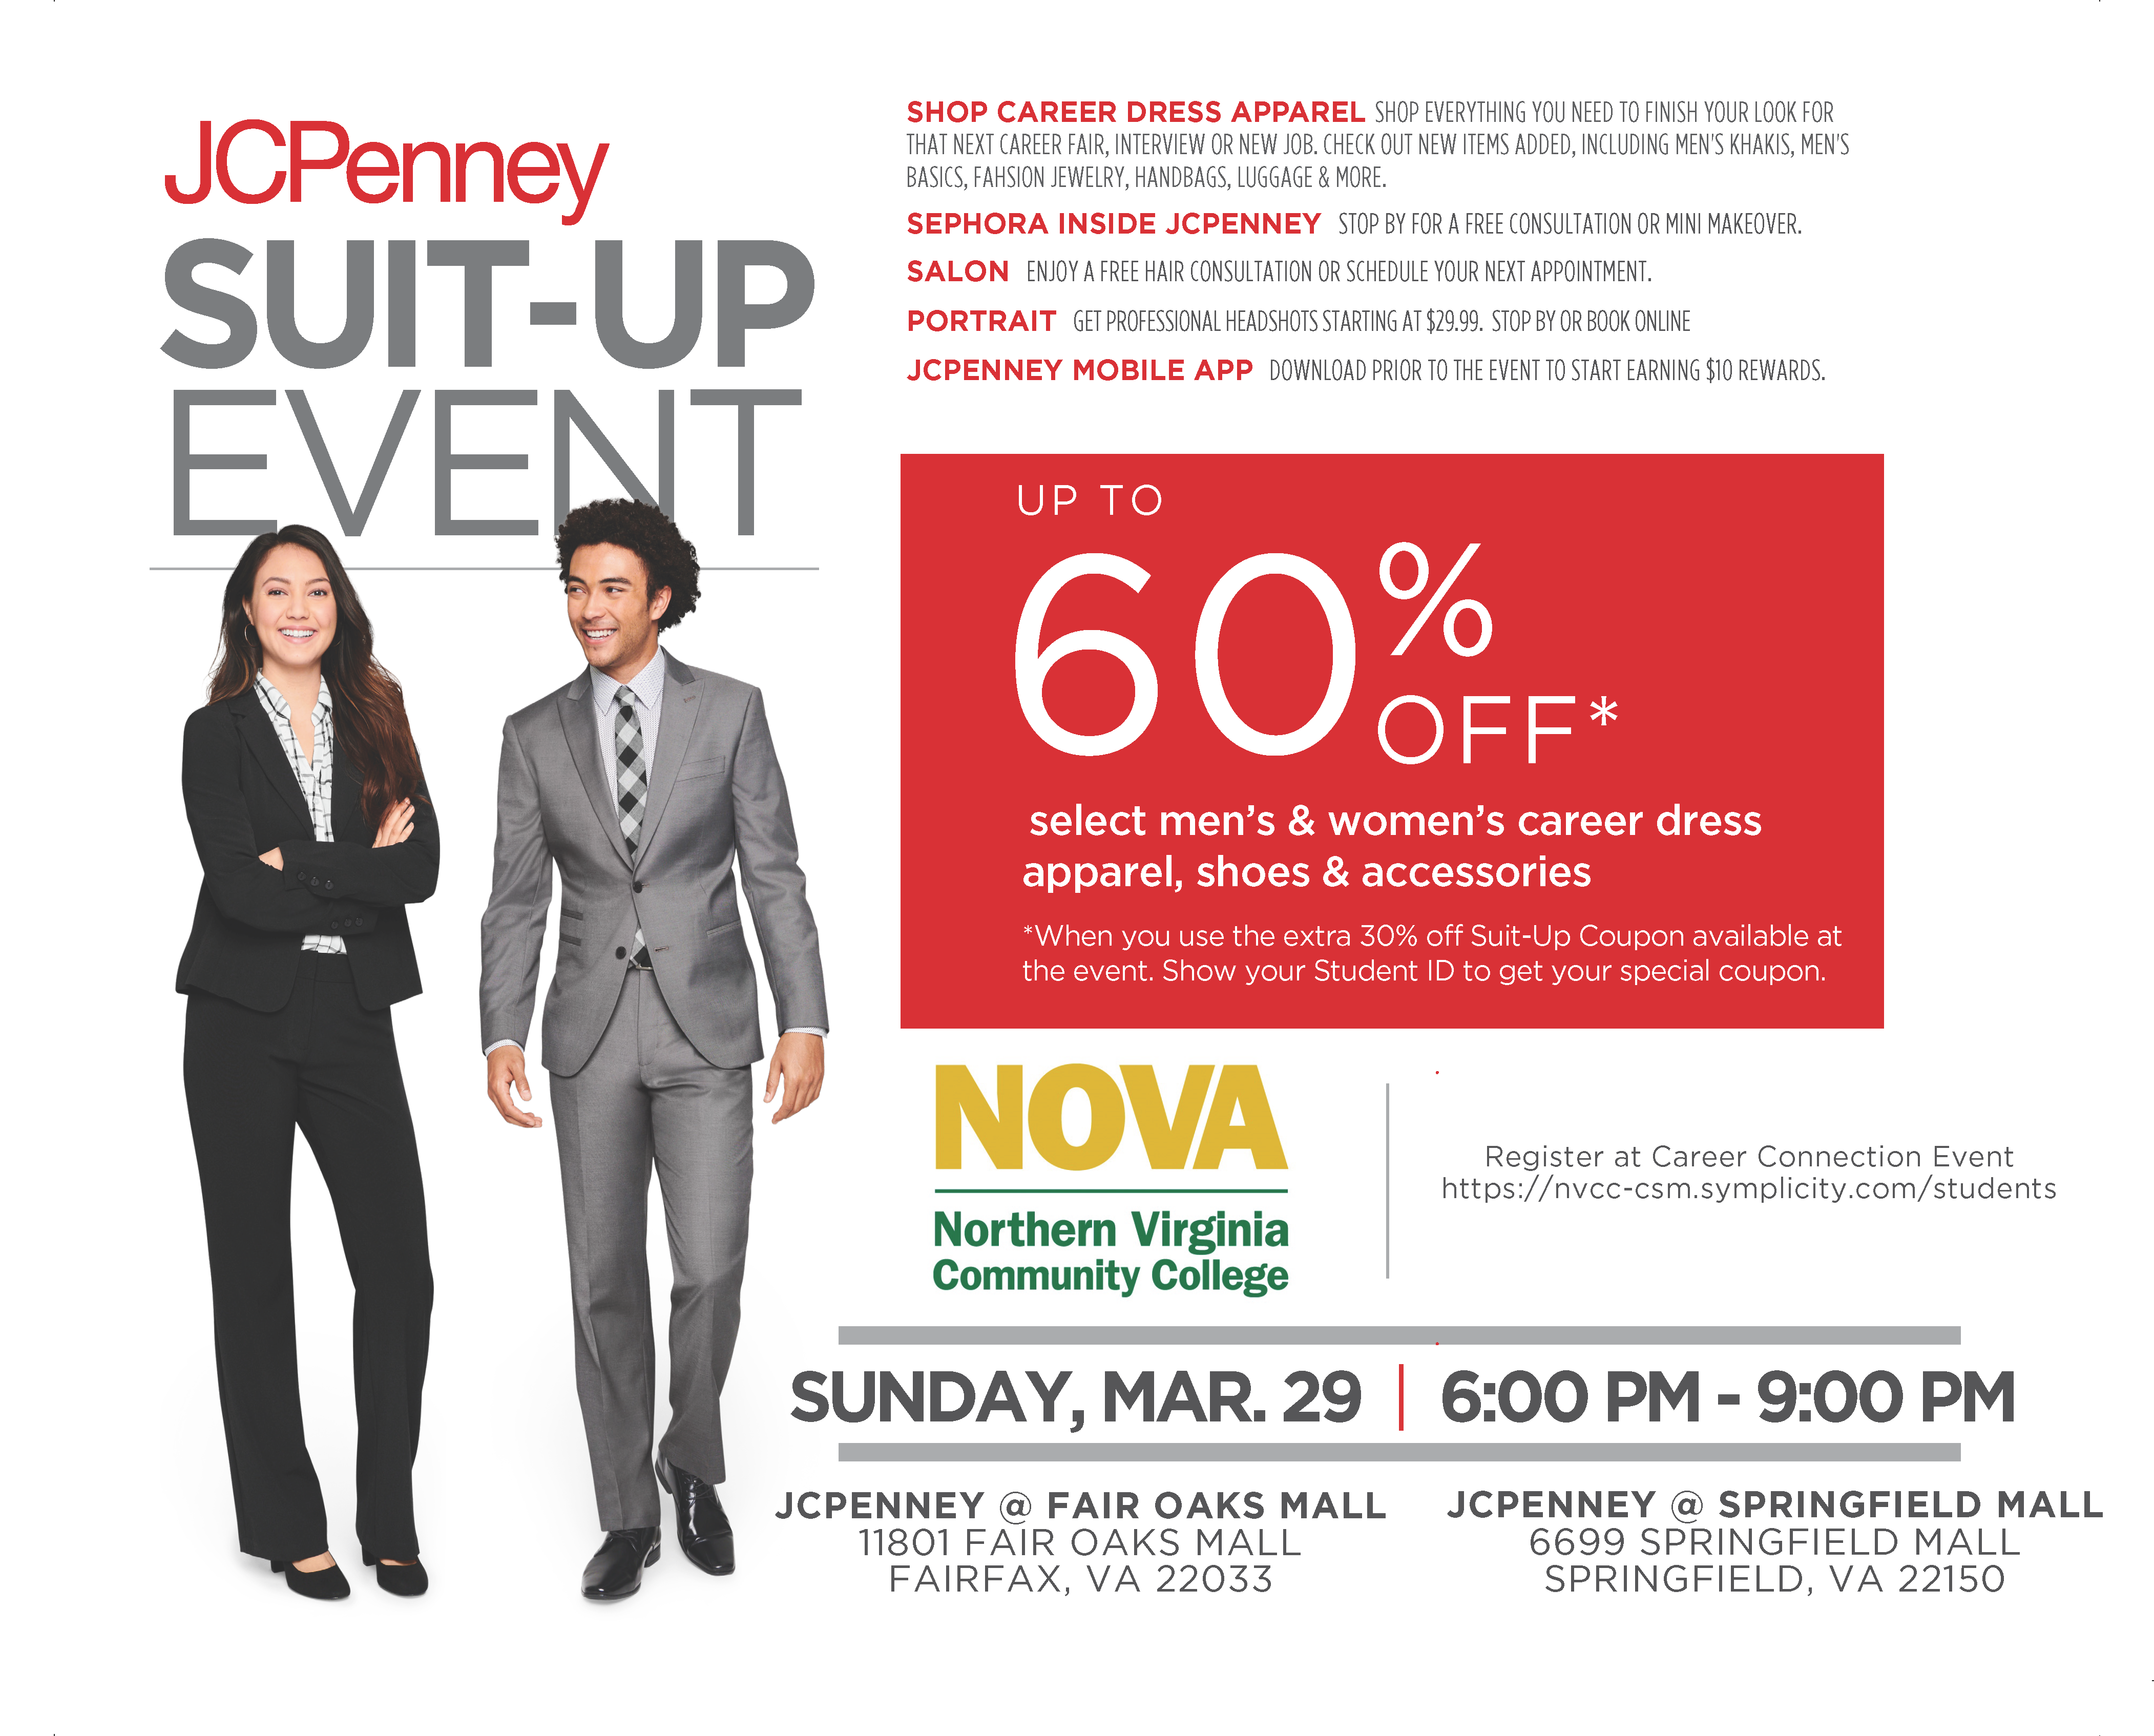 JCPenny Suit-Up Event